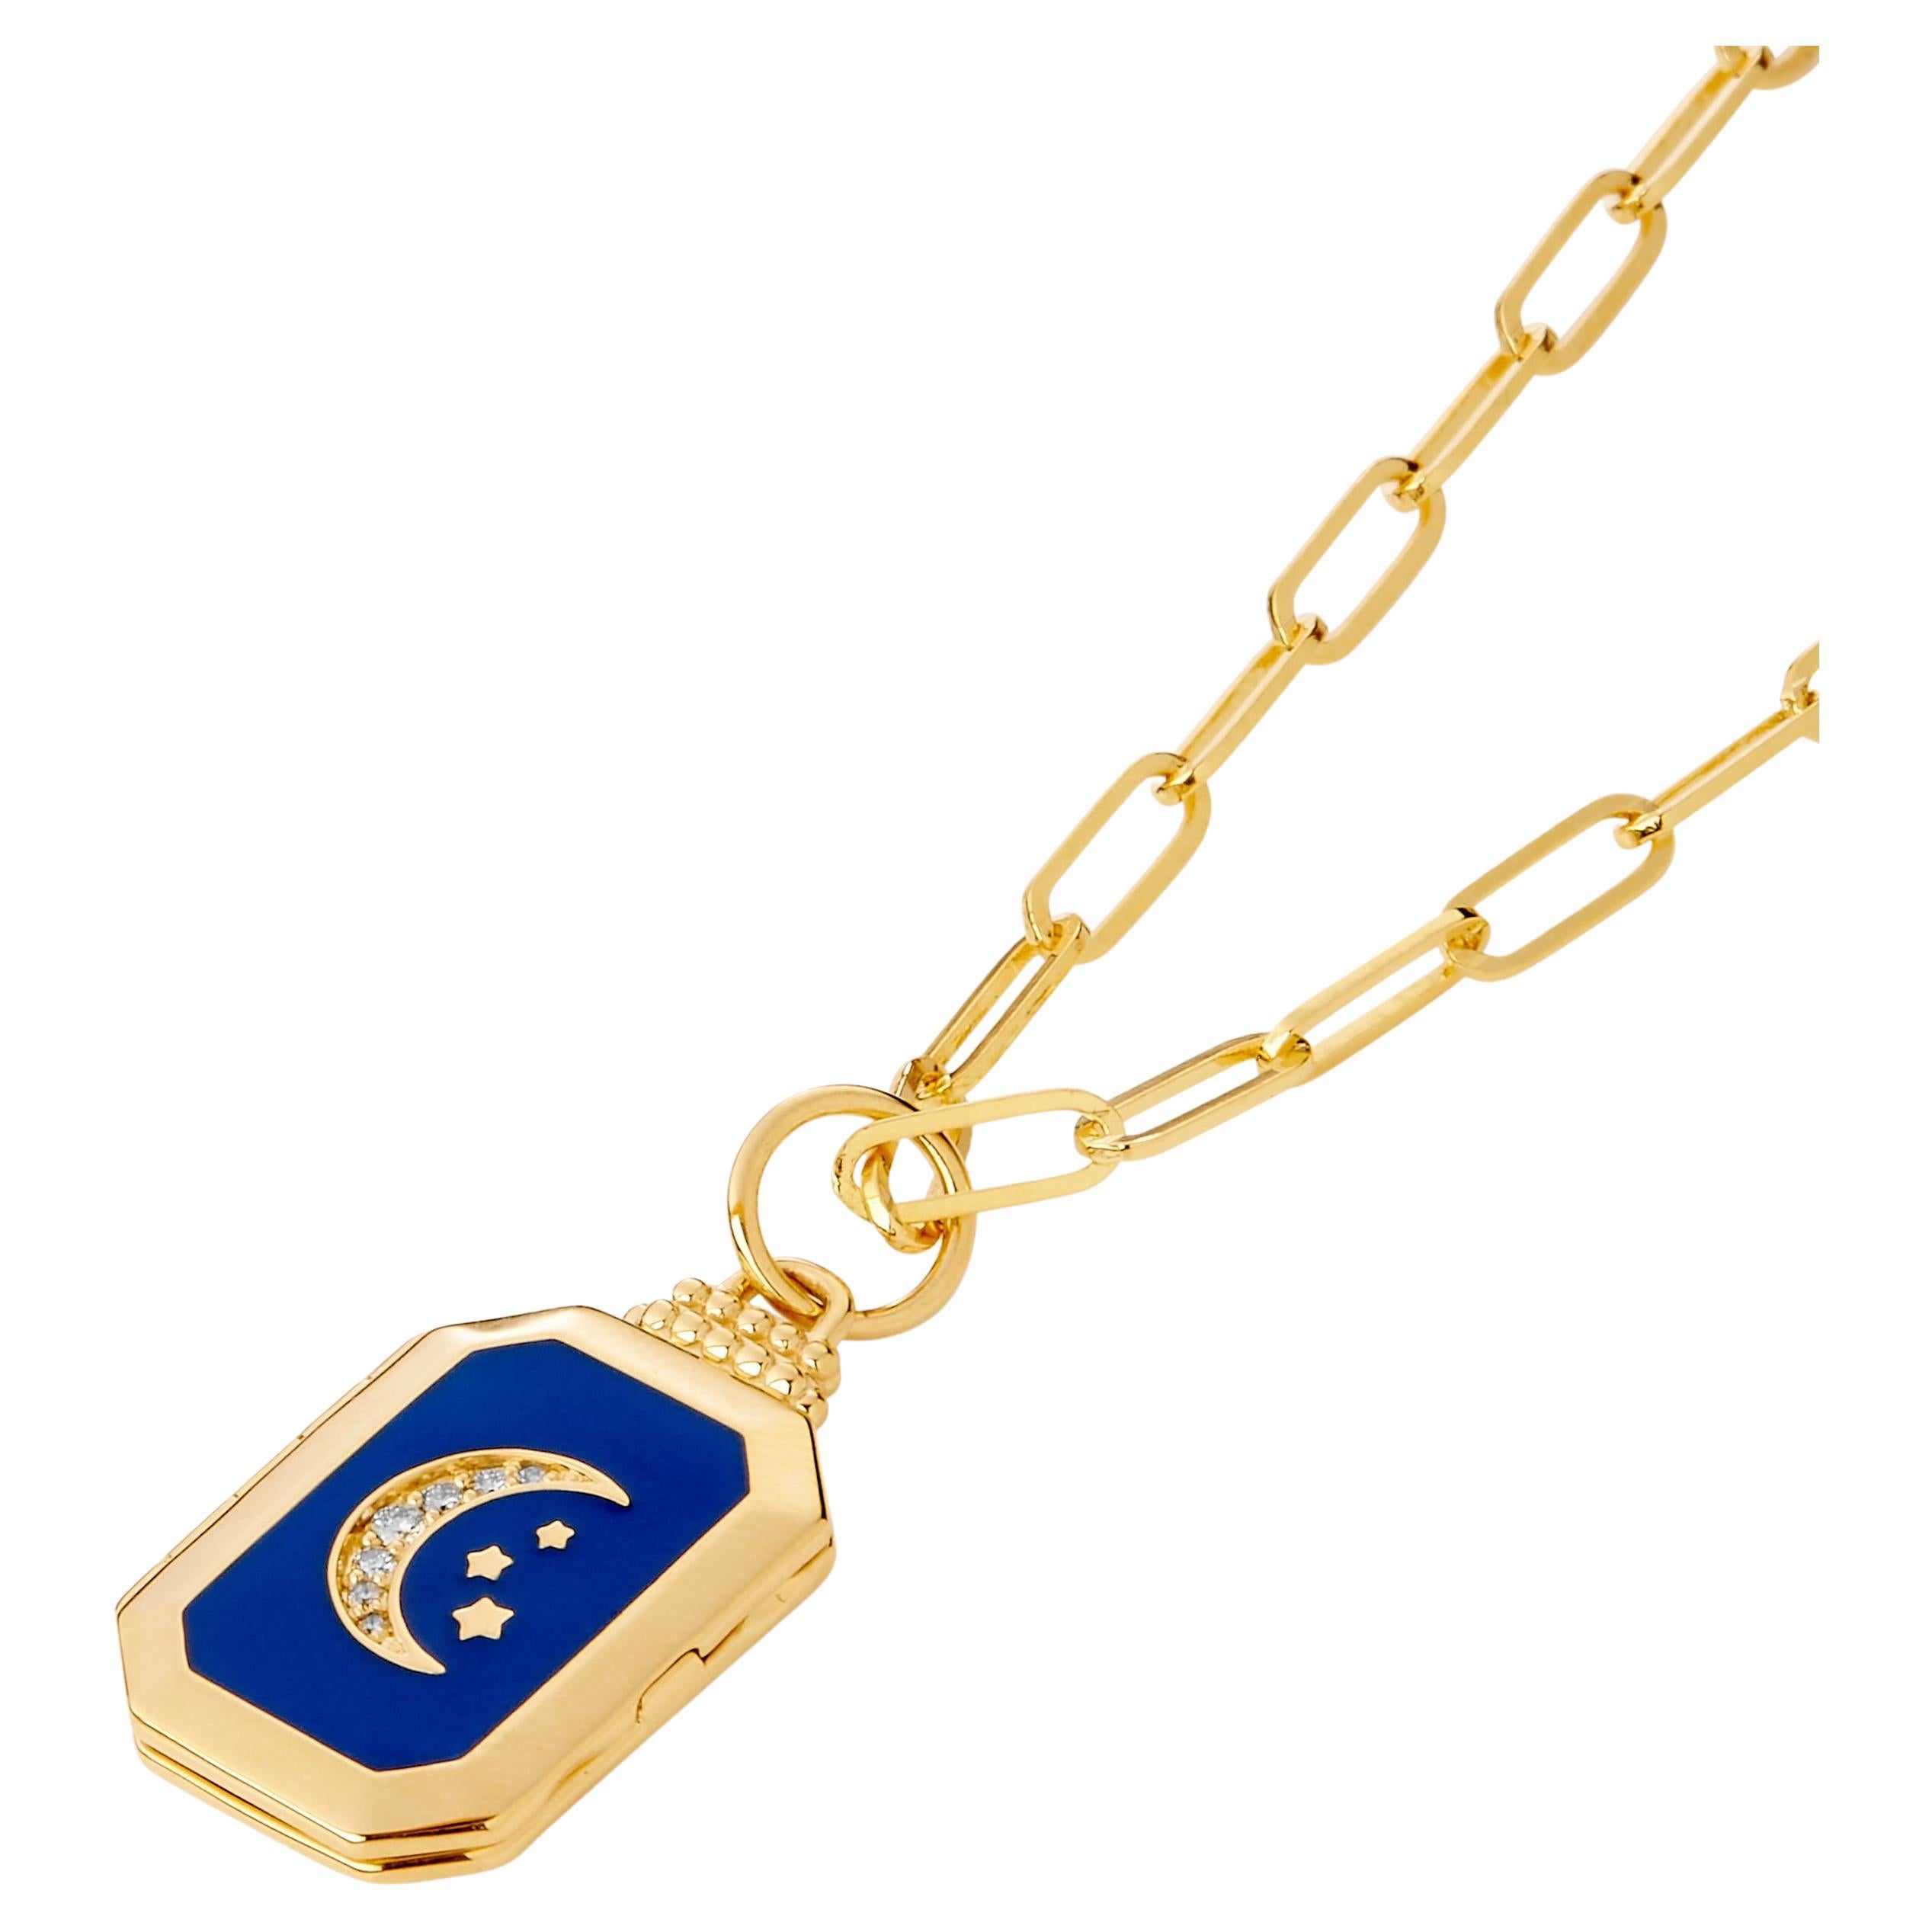 Syna Yellow Gold Moon and Stars Locket with Champagne Diamonds and Lapis Enamel